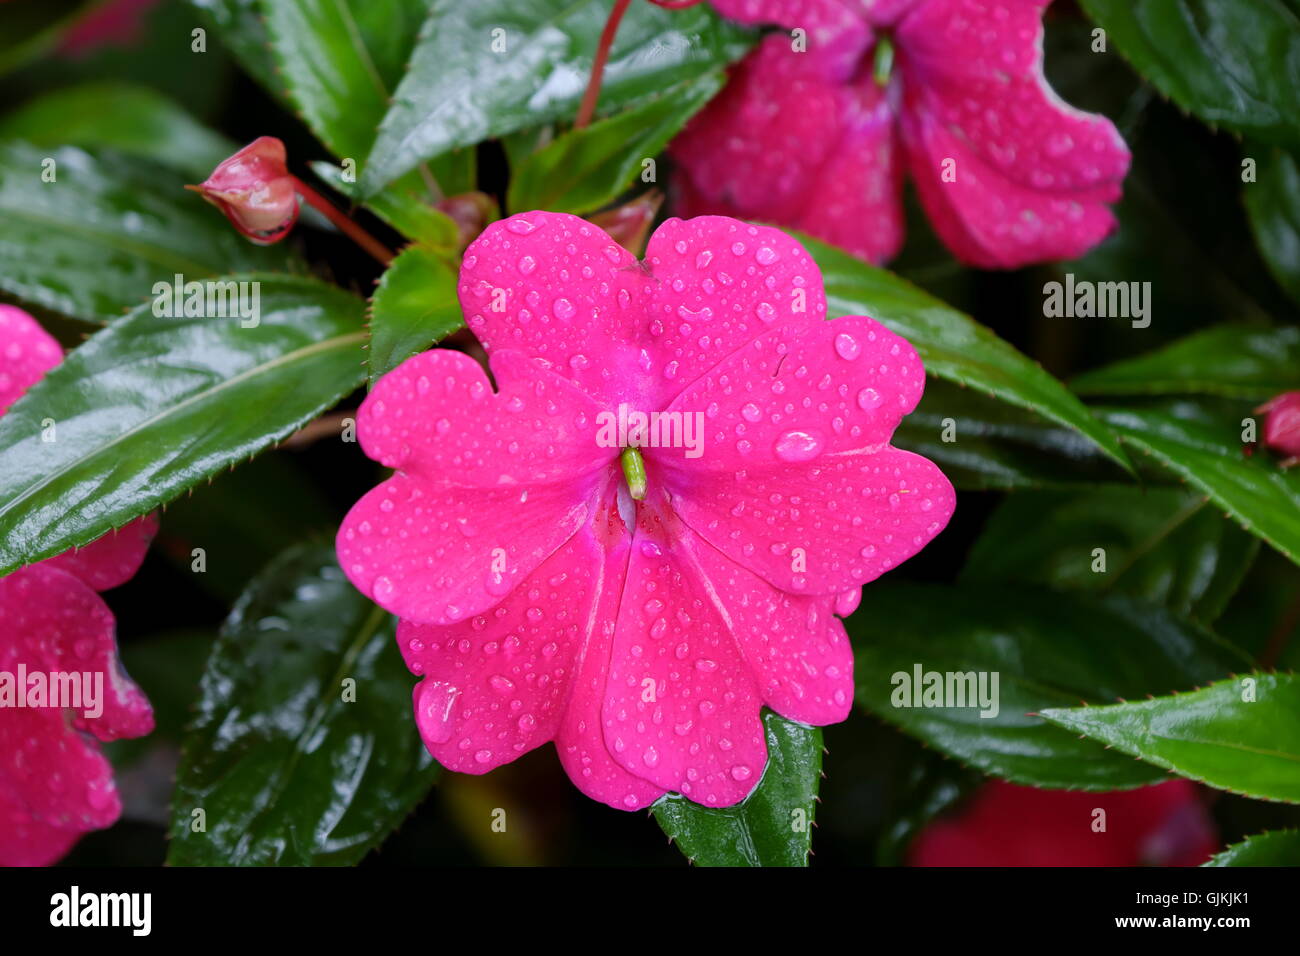 Balsaminaceae, Impatiens, busy lizzie or balsamine with water drops after the rain Stock Photo